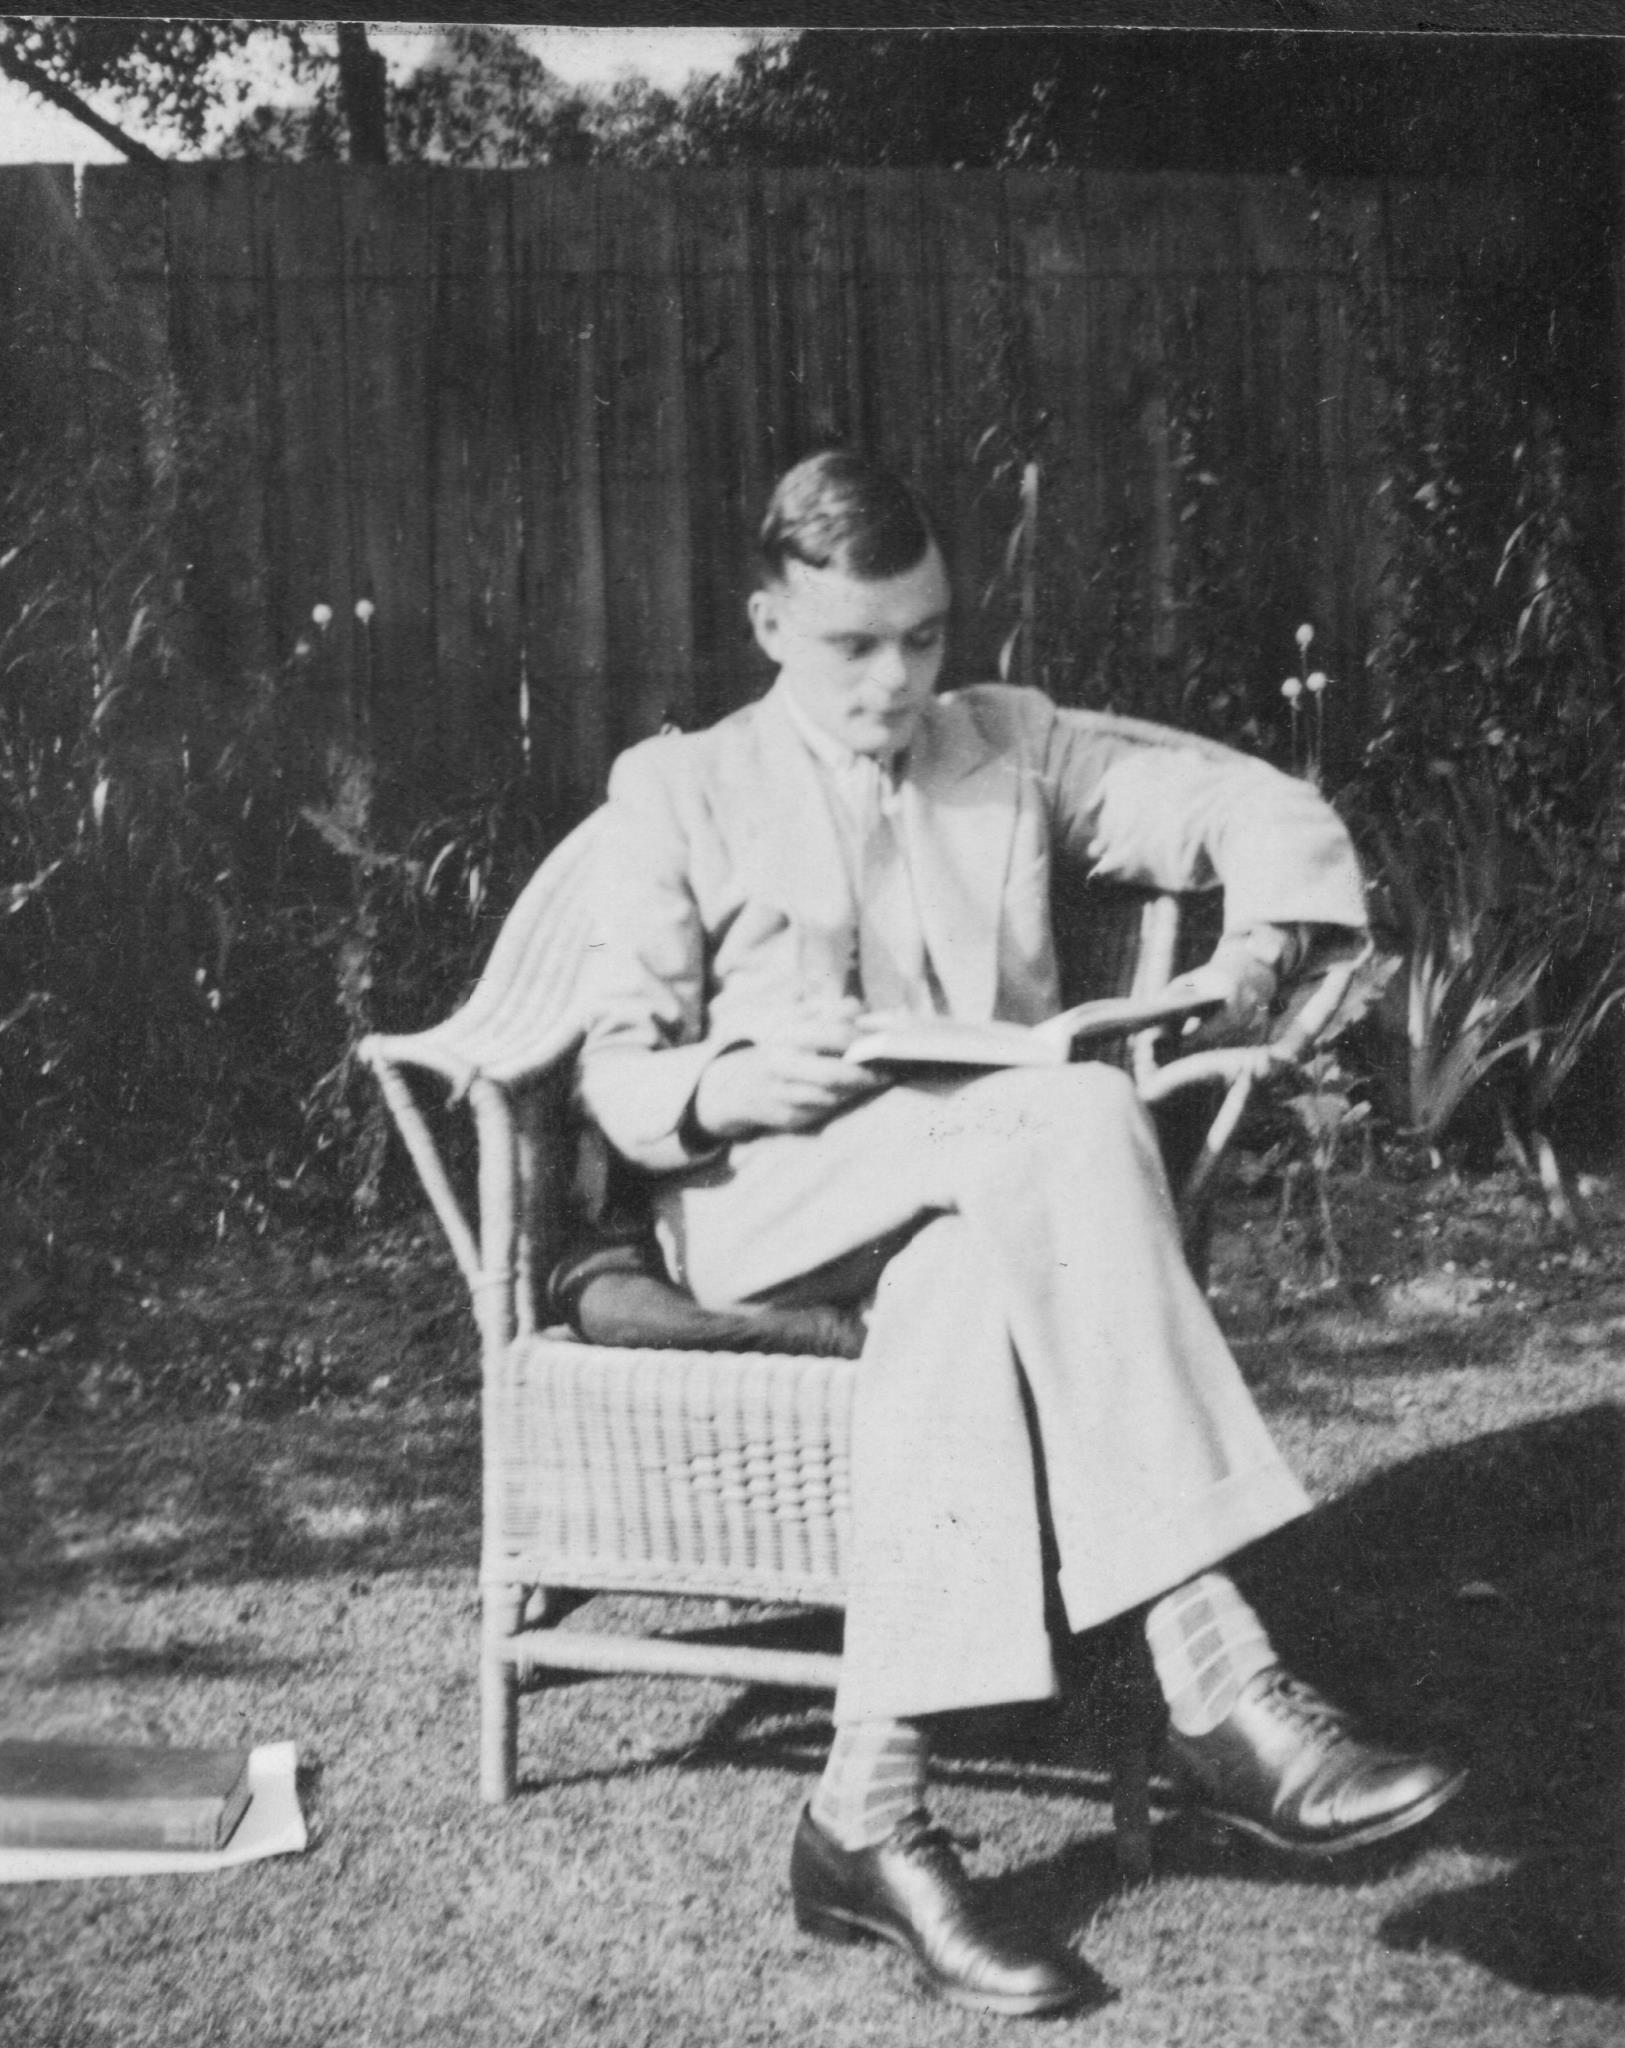 Turing reading in 1935, at his parents’ home garden. That same year, he published Equivalence of left and right almost periodicity, his first paper ever.